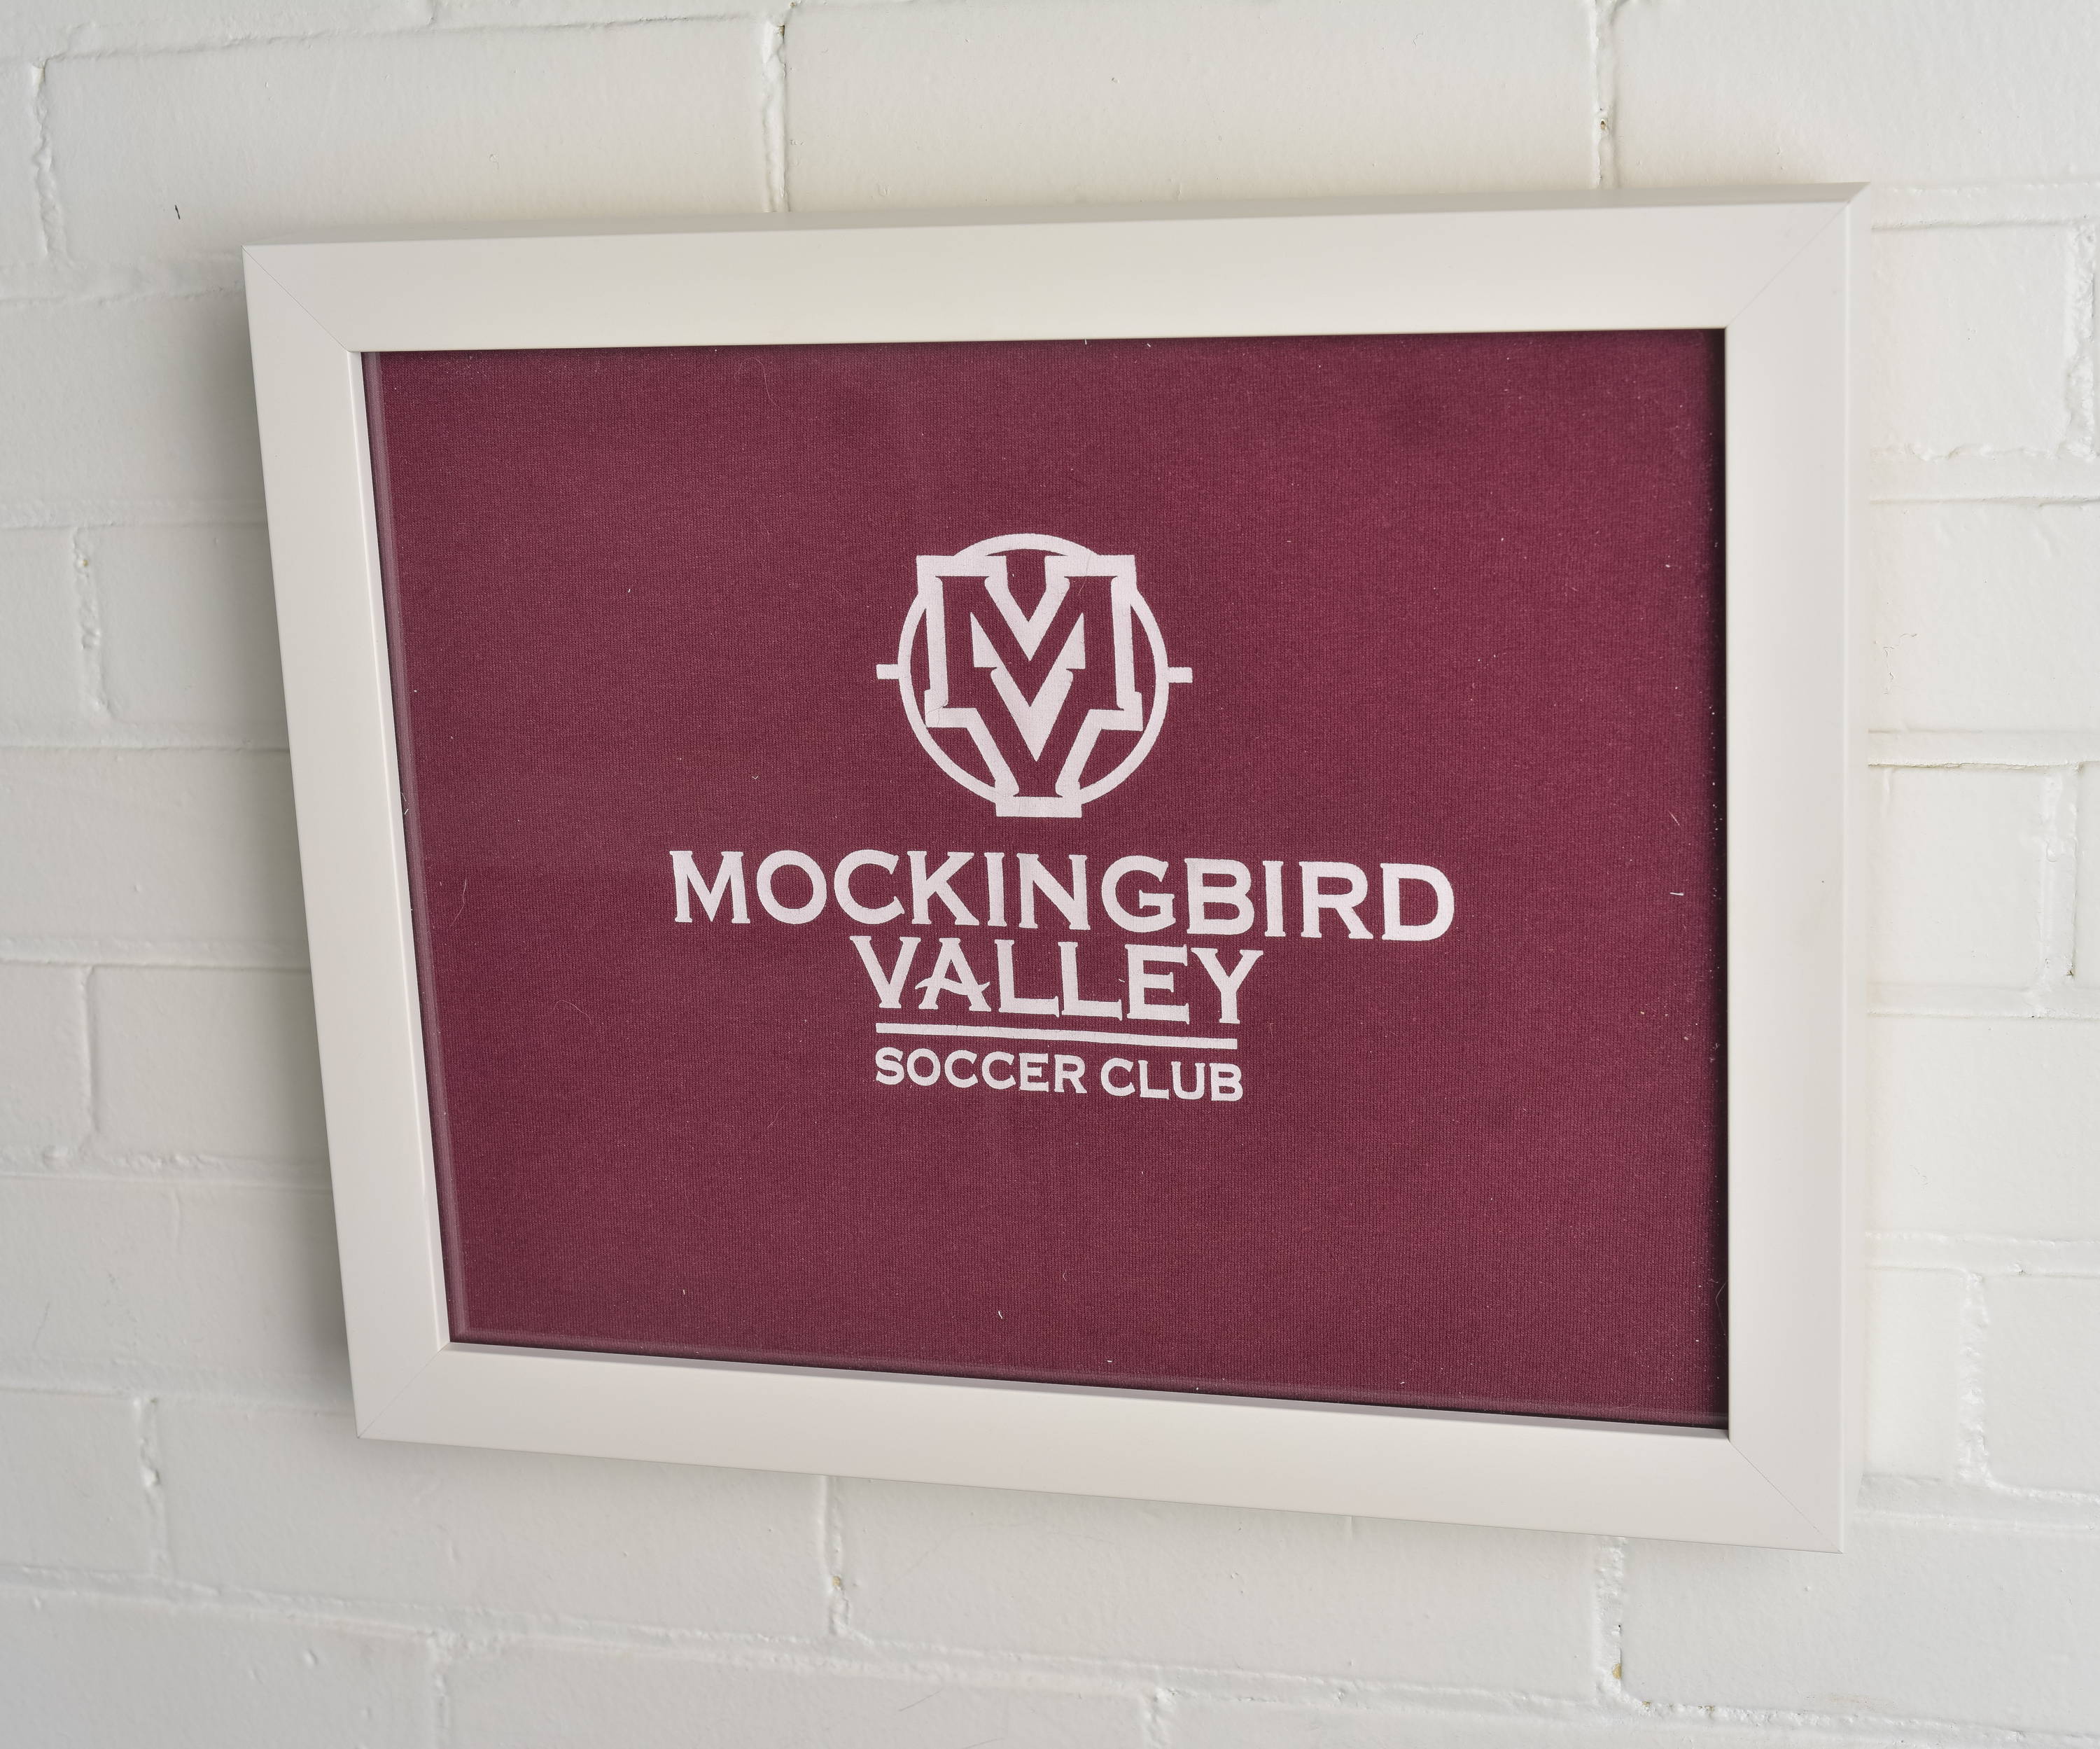 Mockingbird Valley Soccer Club framed and displayed in a Shart Premium Square T-Shirt Frame Display Case - White